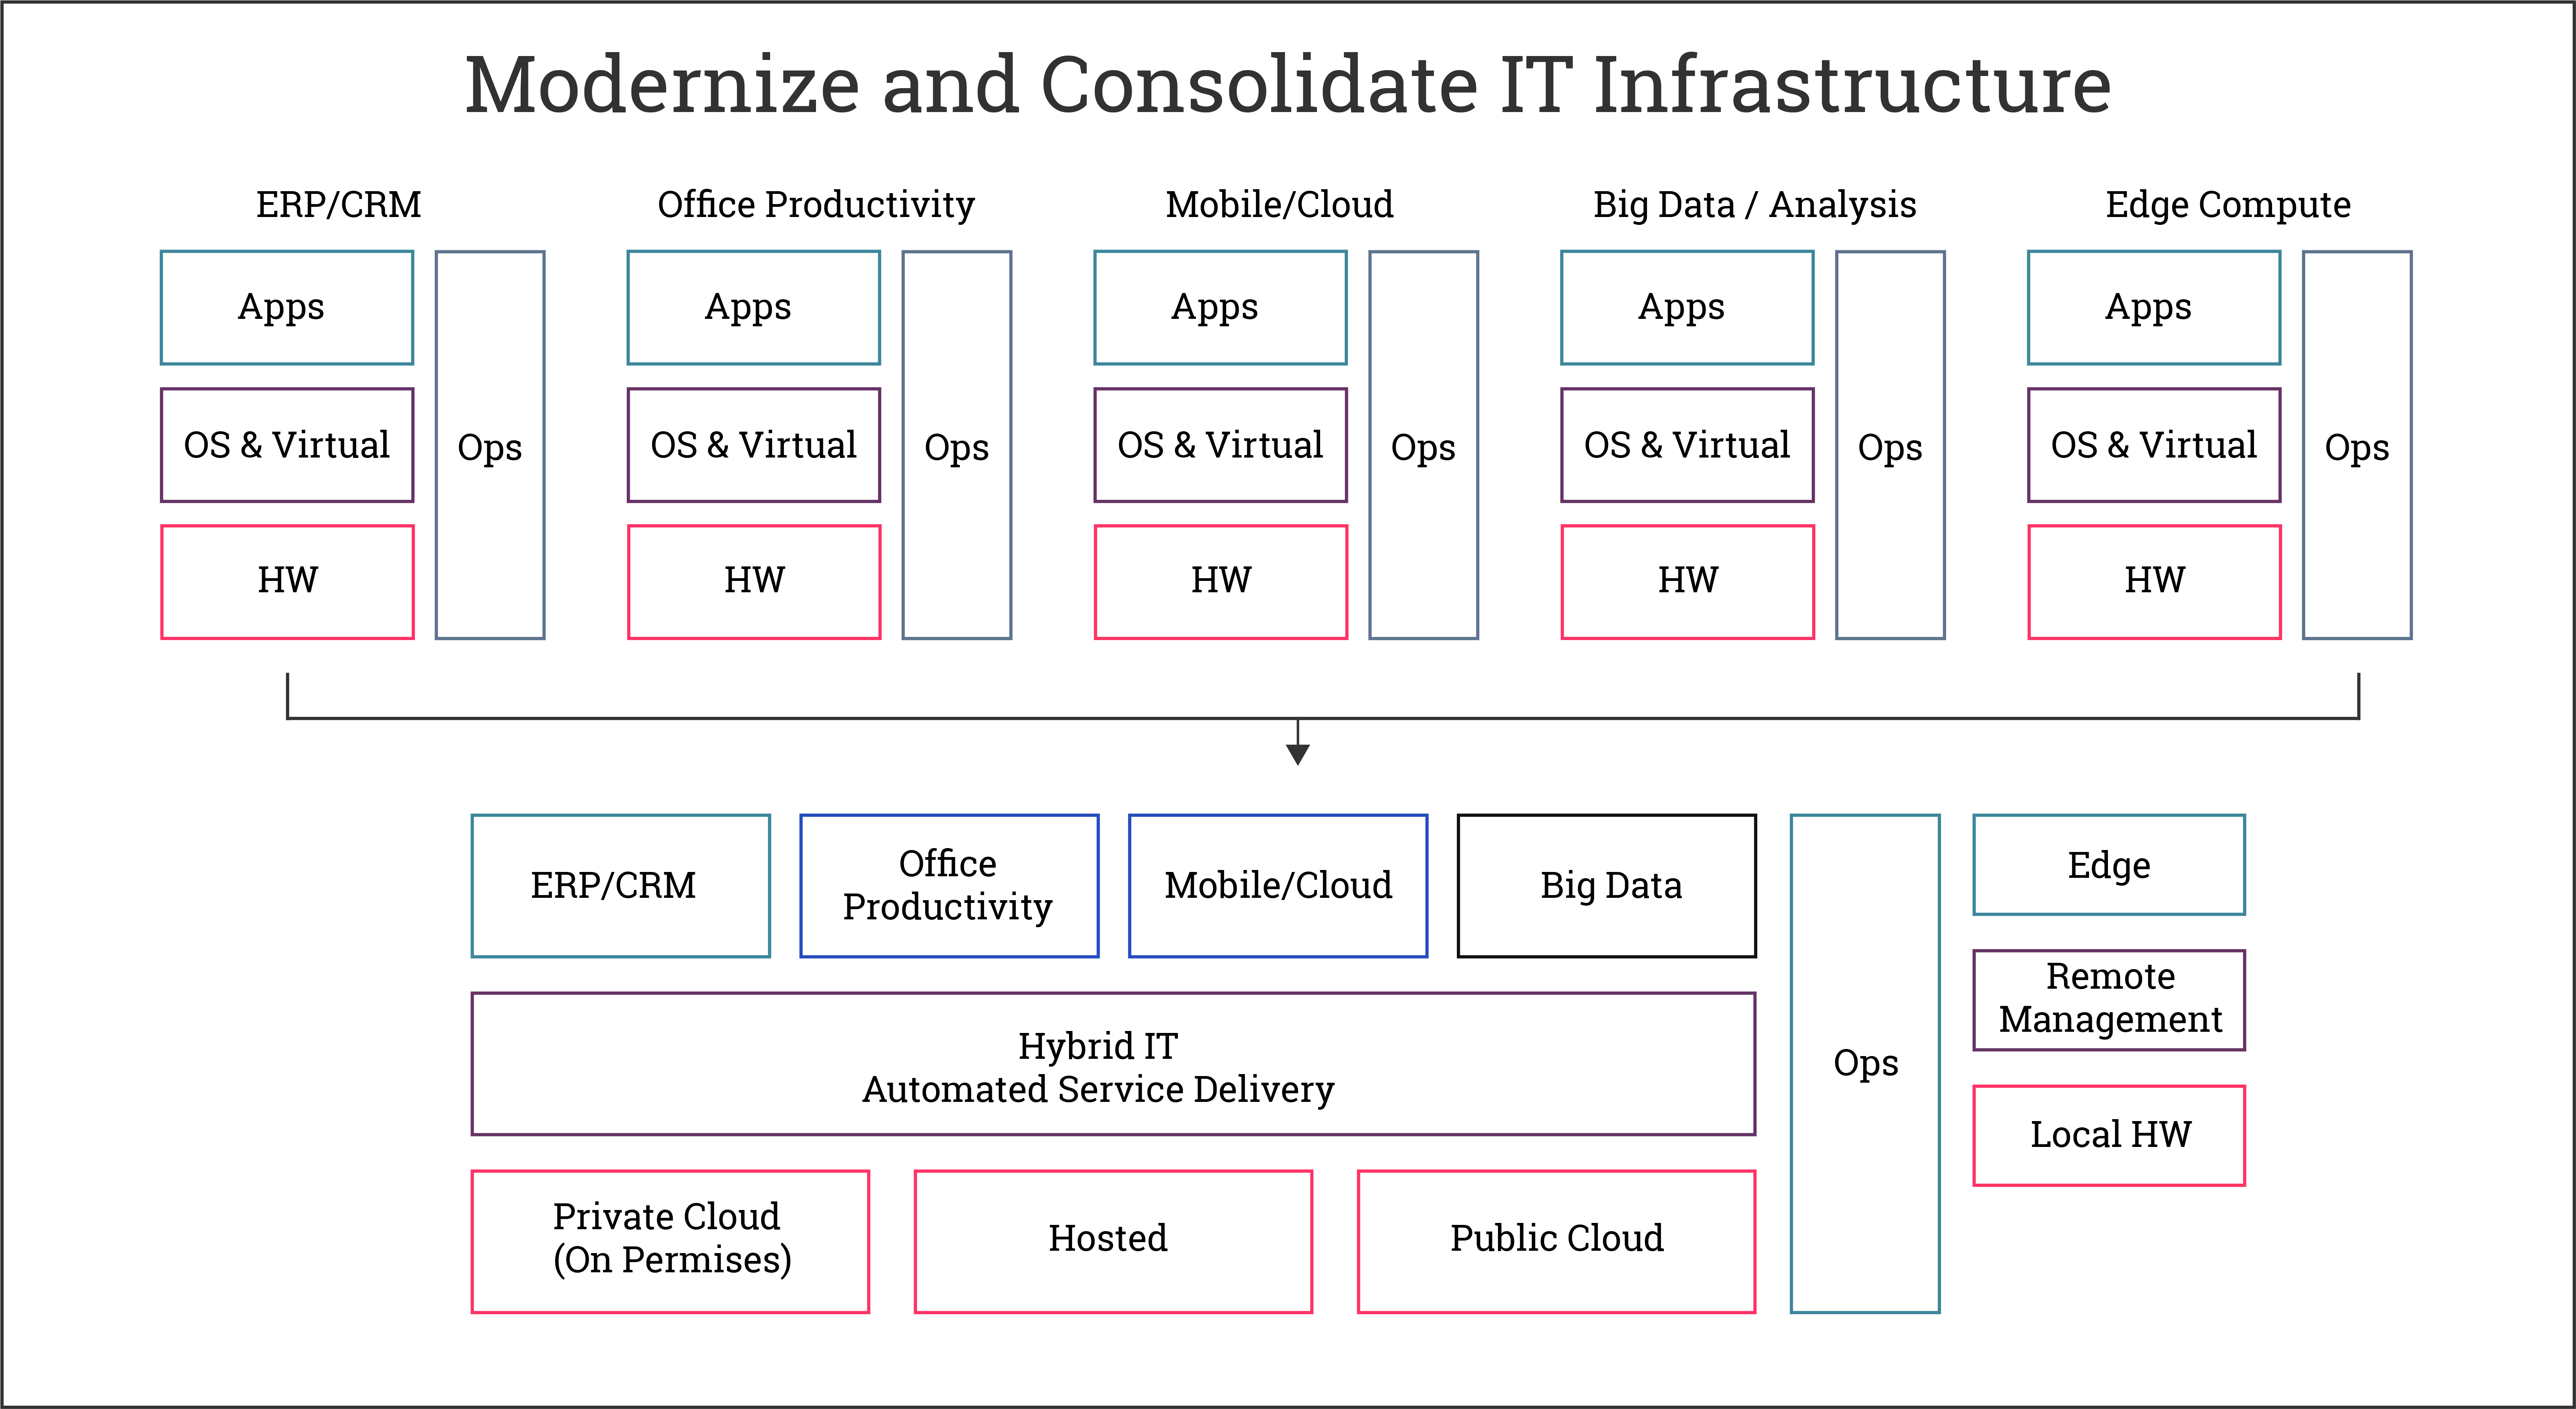 Modernize and Consolidate IT Infrastructure